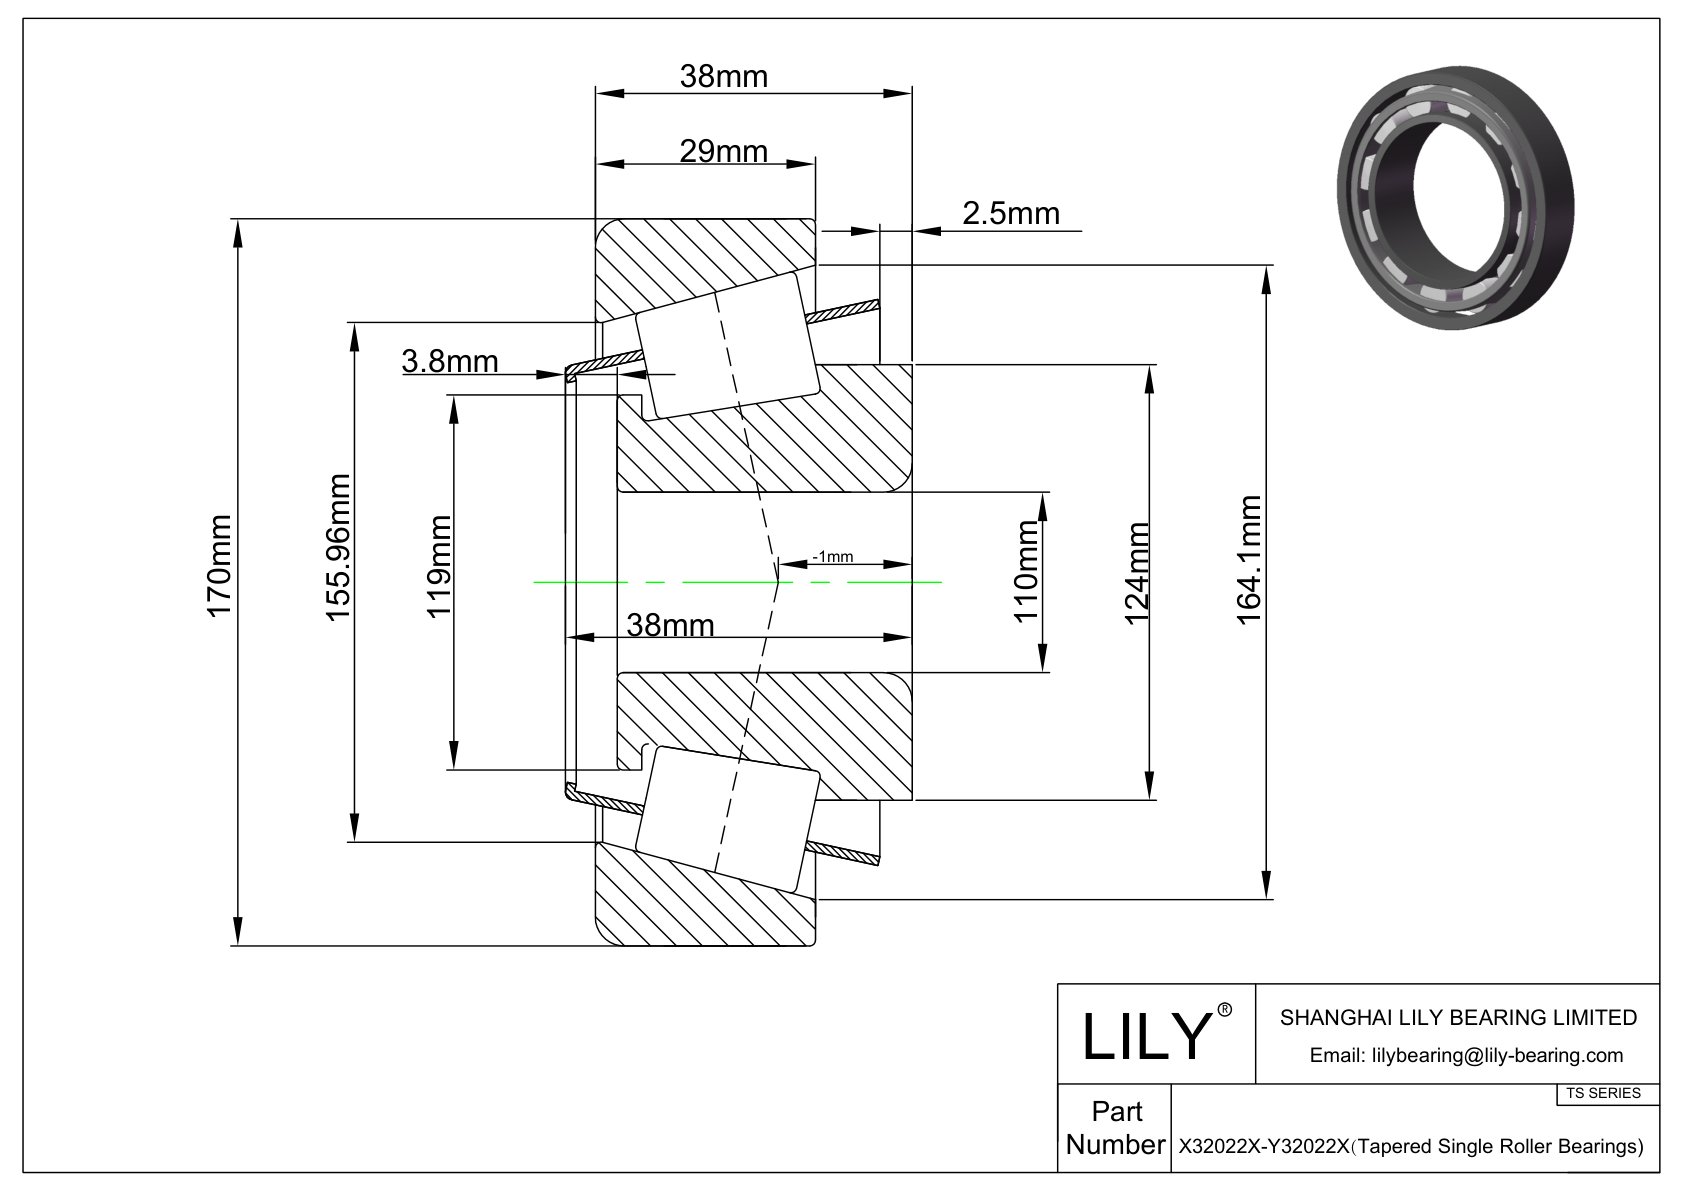 X32022X-Y32022X TS (Tapered Single Roller Bearings) (Metric) cad drawing